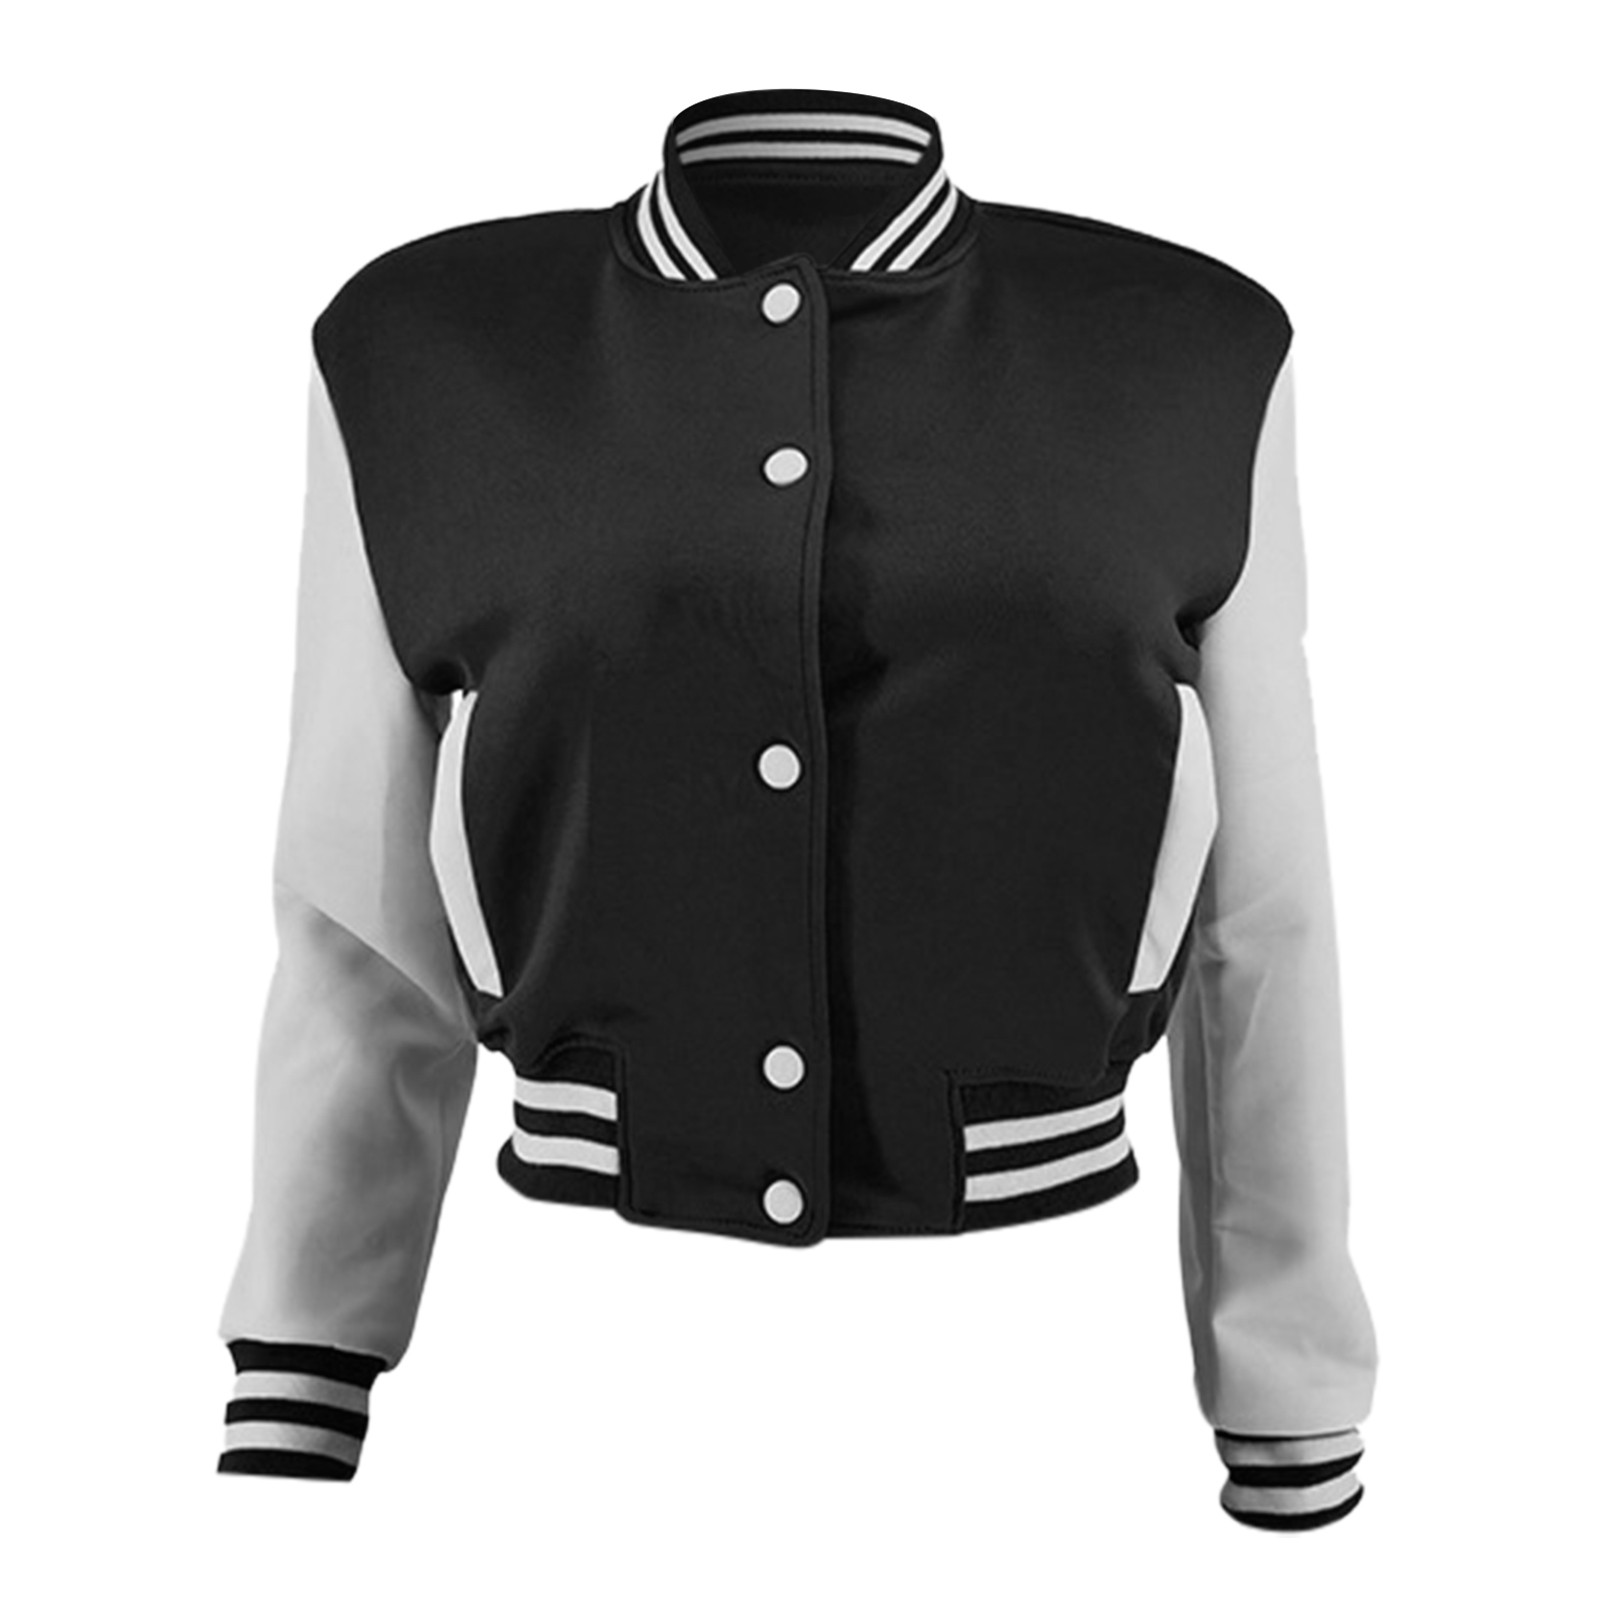 Light Jacket for Women Casual Jackets under Fashion Women Autumn Casual Patchwork Stand Collar Button Long Sleeve Pocket Coat Baseball Jackets Fashion Umbrella Women - image 4 of 6